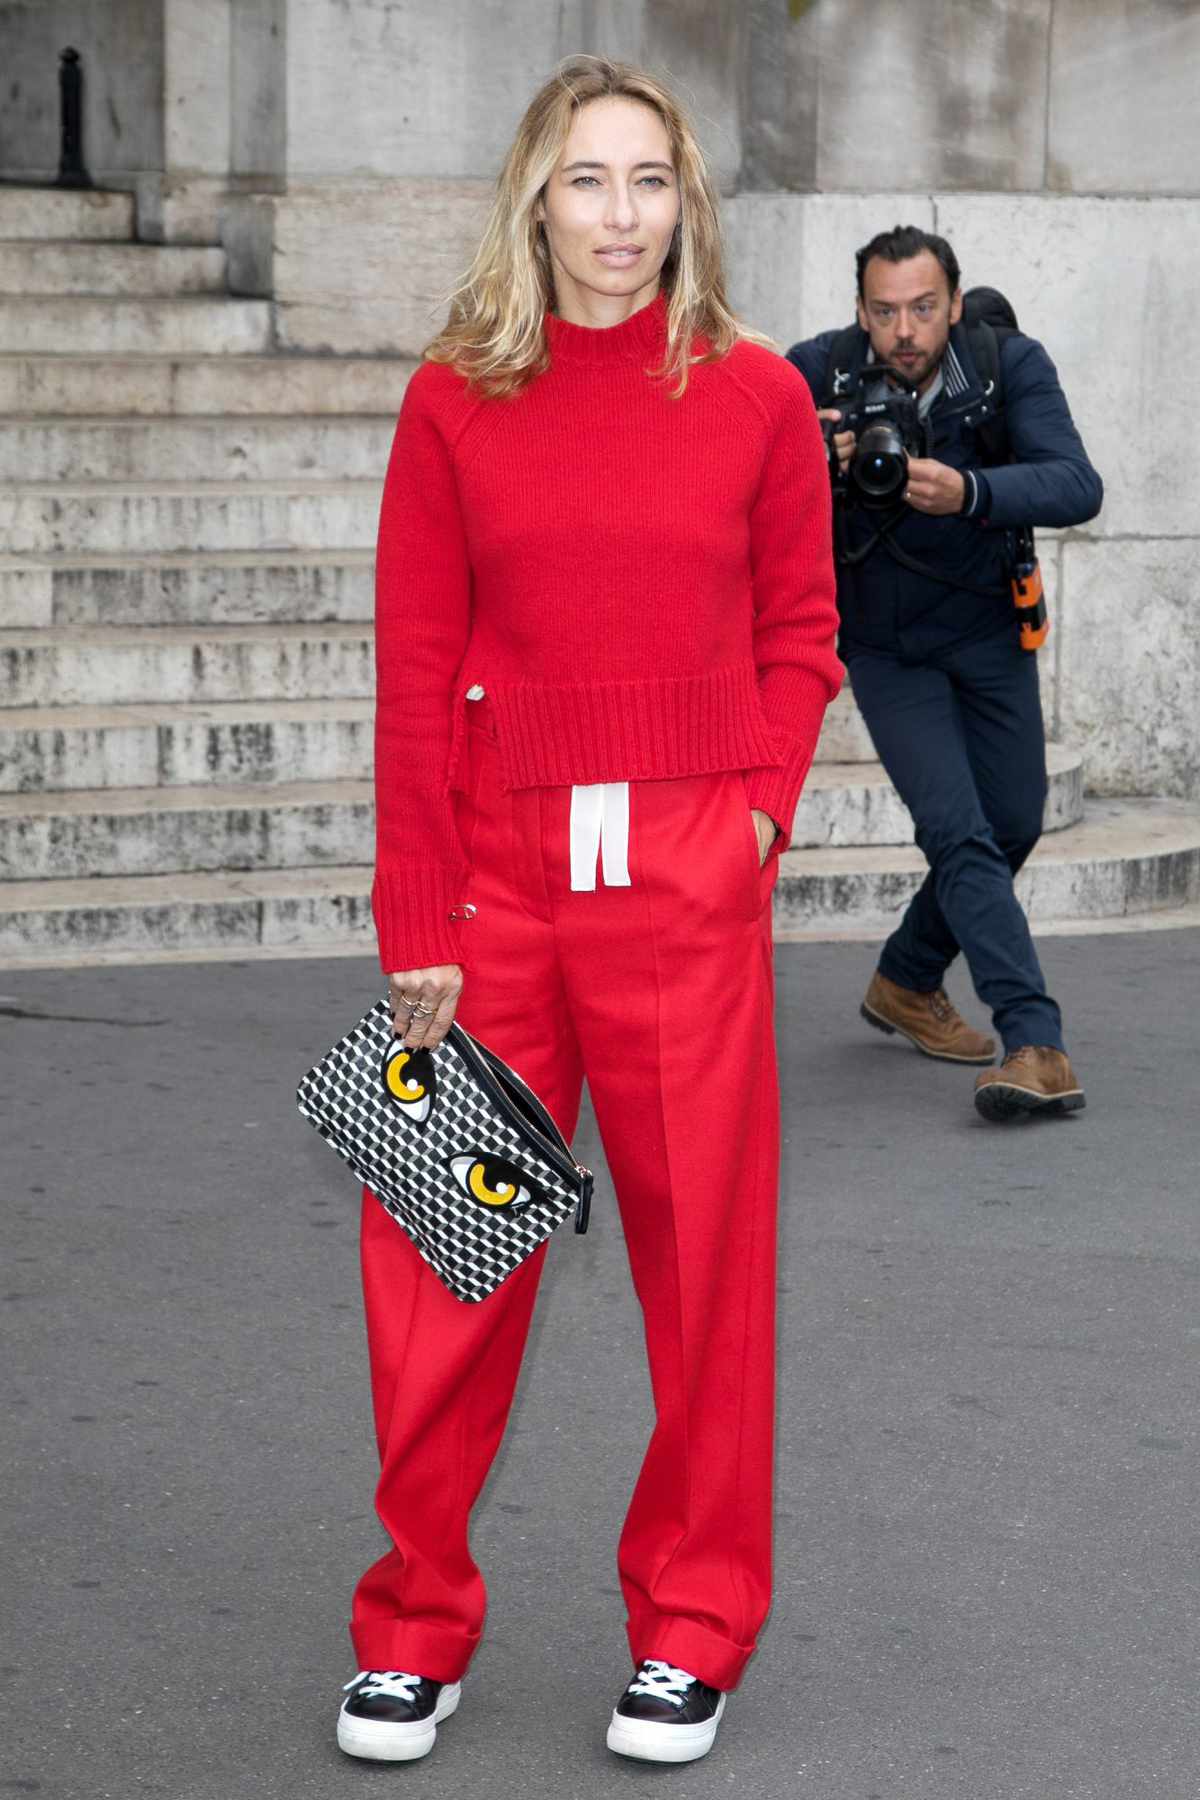 ALL RED AND BOLD ACCESSORIES